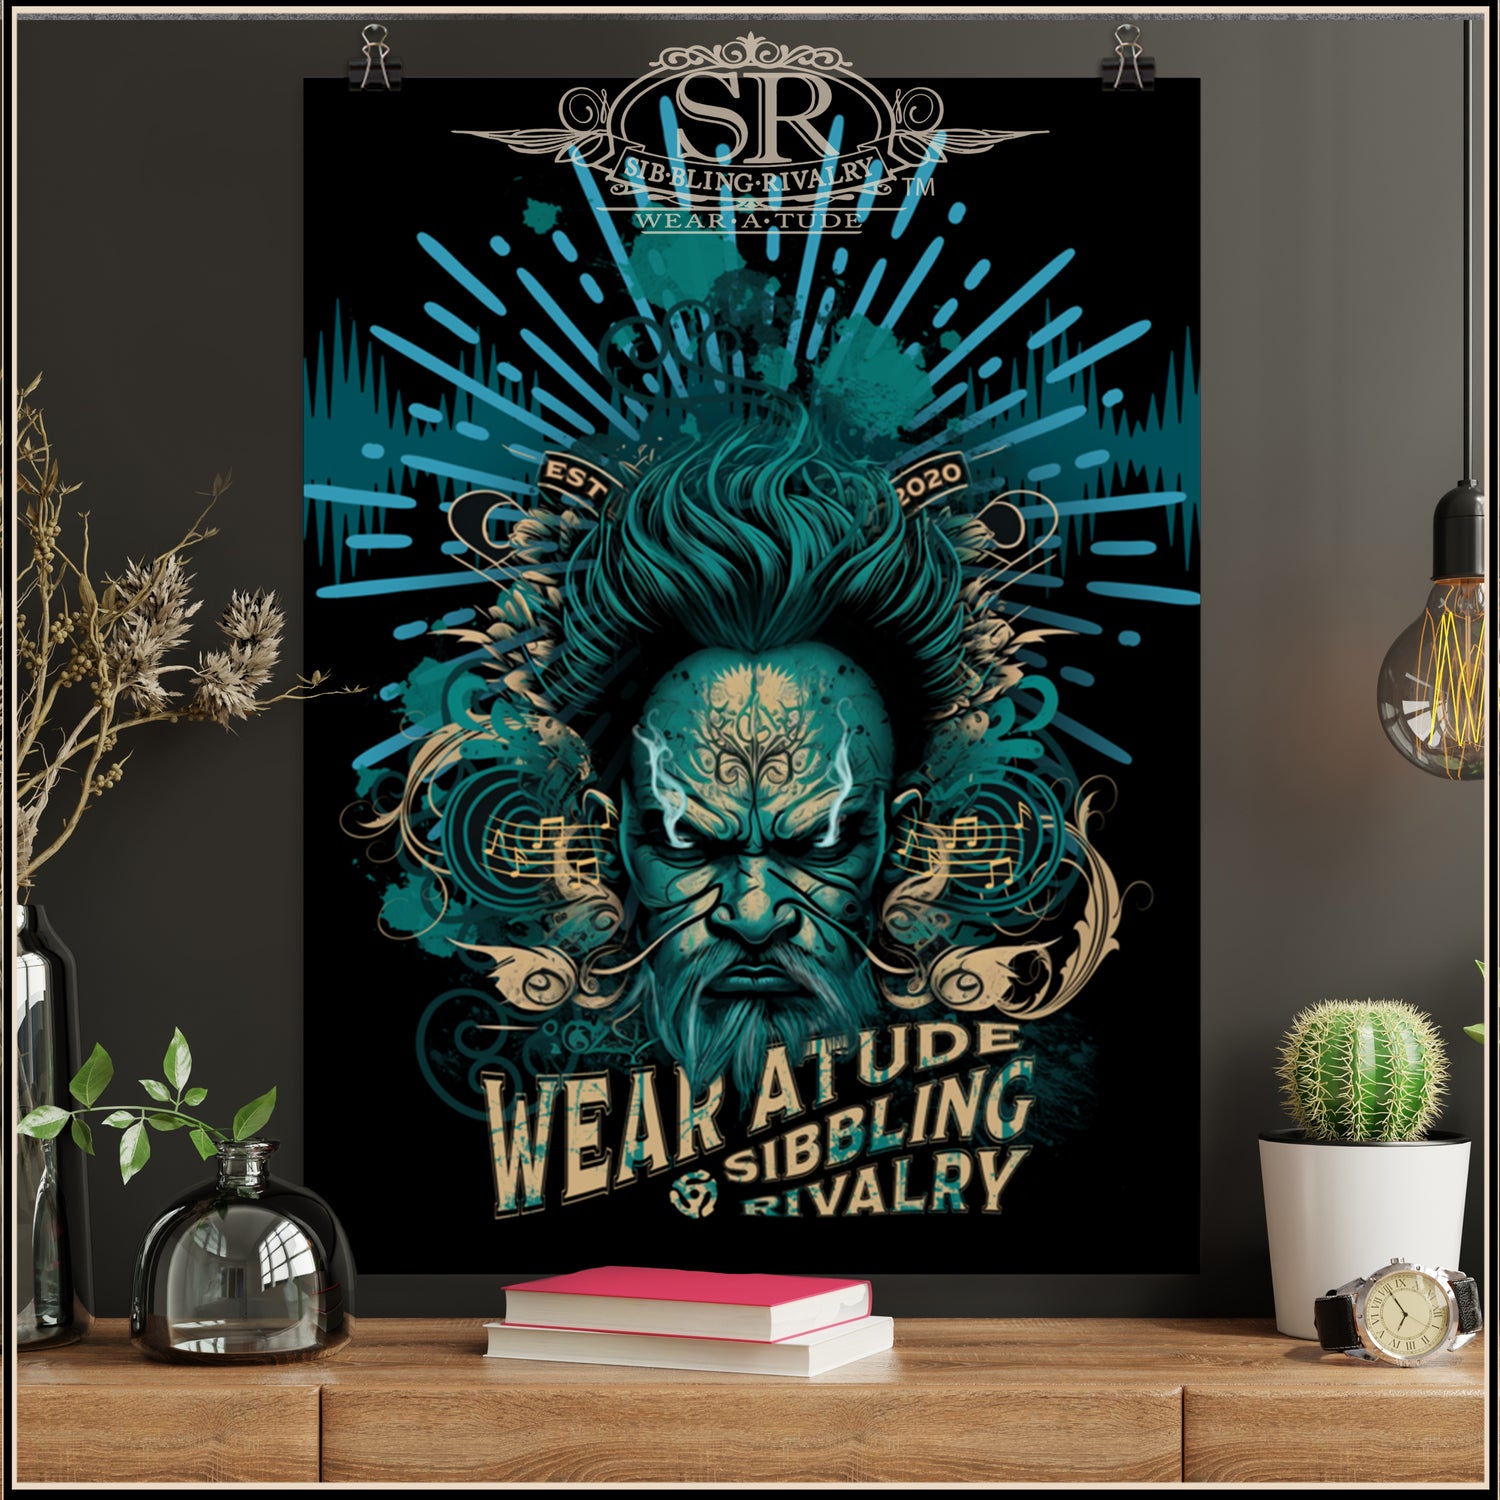 BLUE BARRY BAD ATTITUDE Poster - SIB.BLING RIVALRY